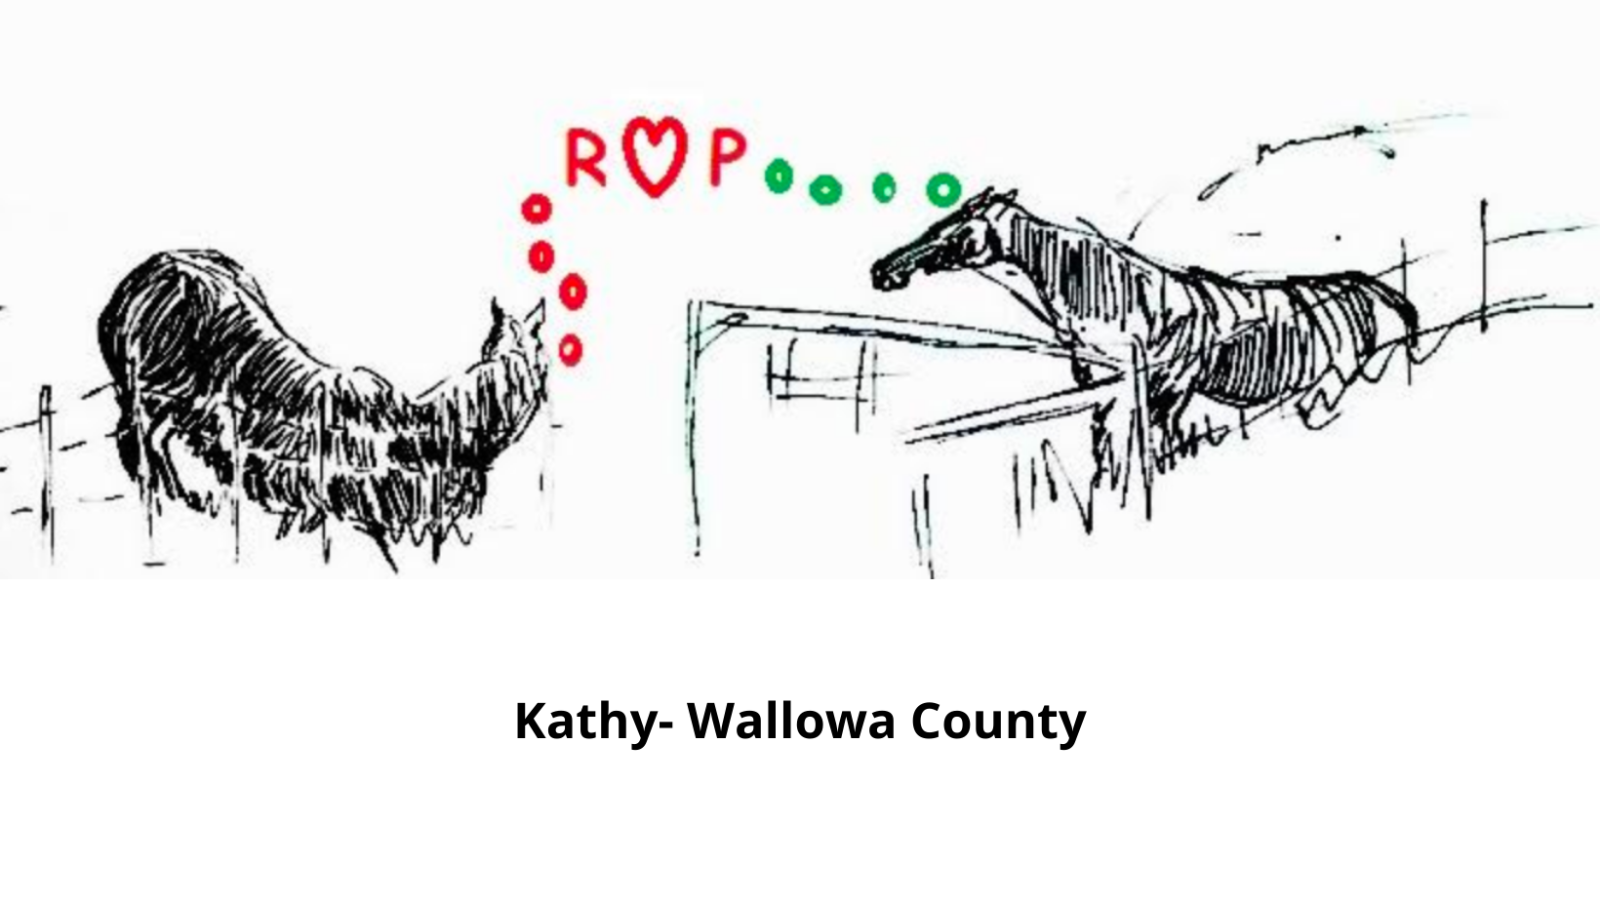 A drawing of two horses from Kathy in Wallowa County, with the letters ROP, where the "O" is a heart shape